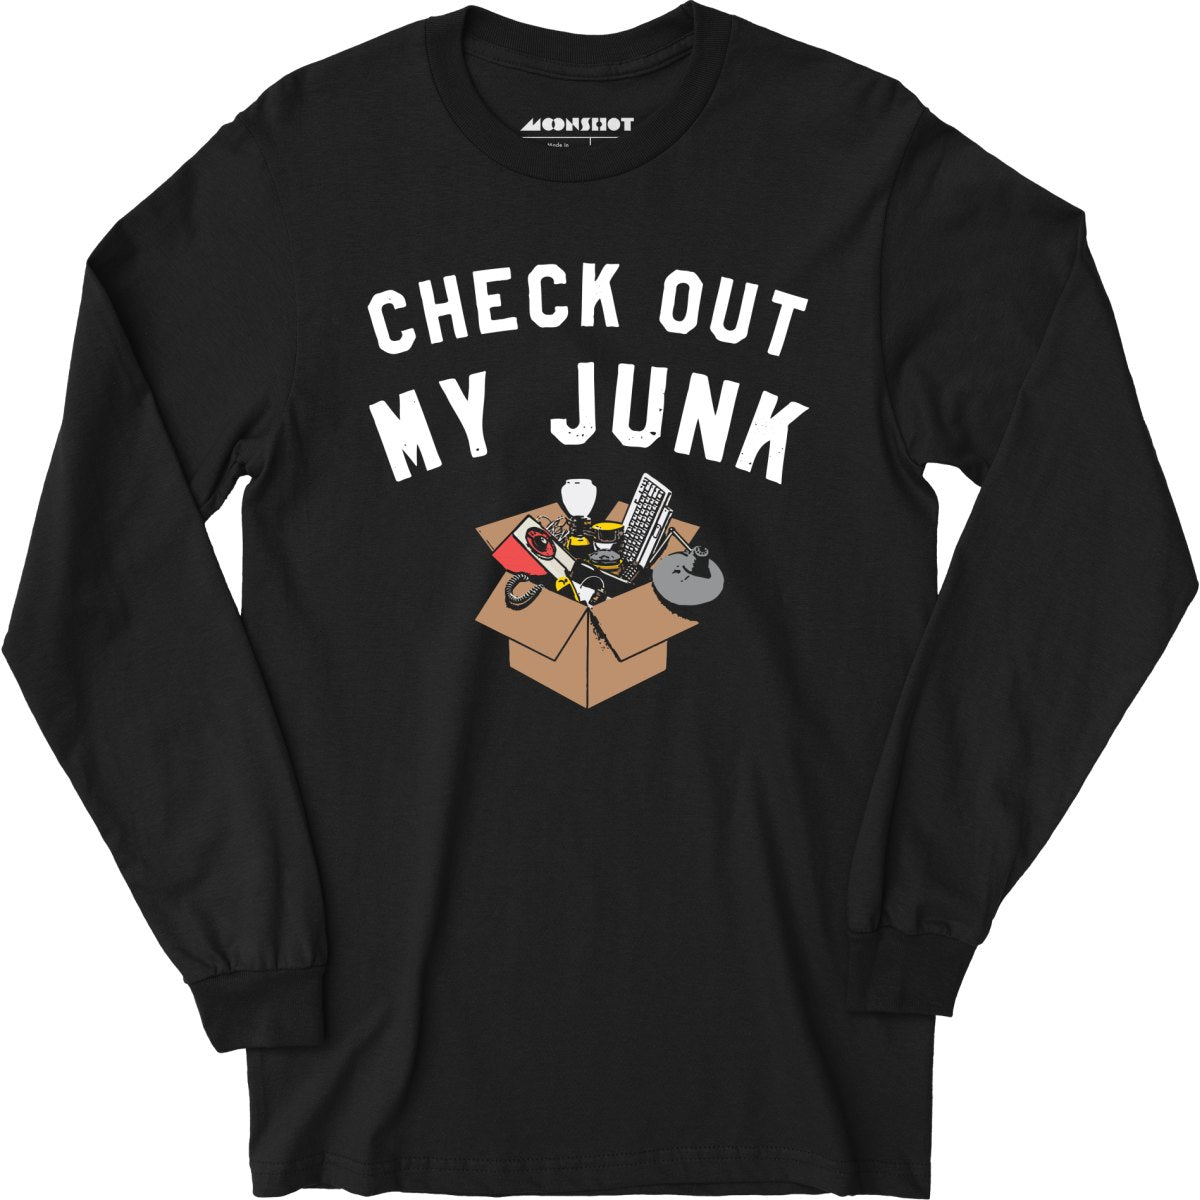 Check Out My Junk - Long Sleeve T-Shirt